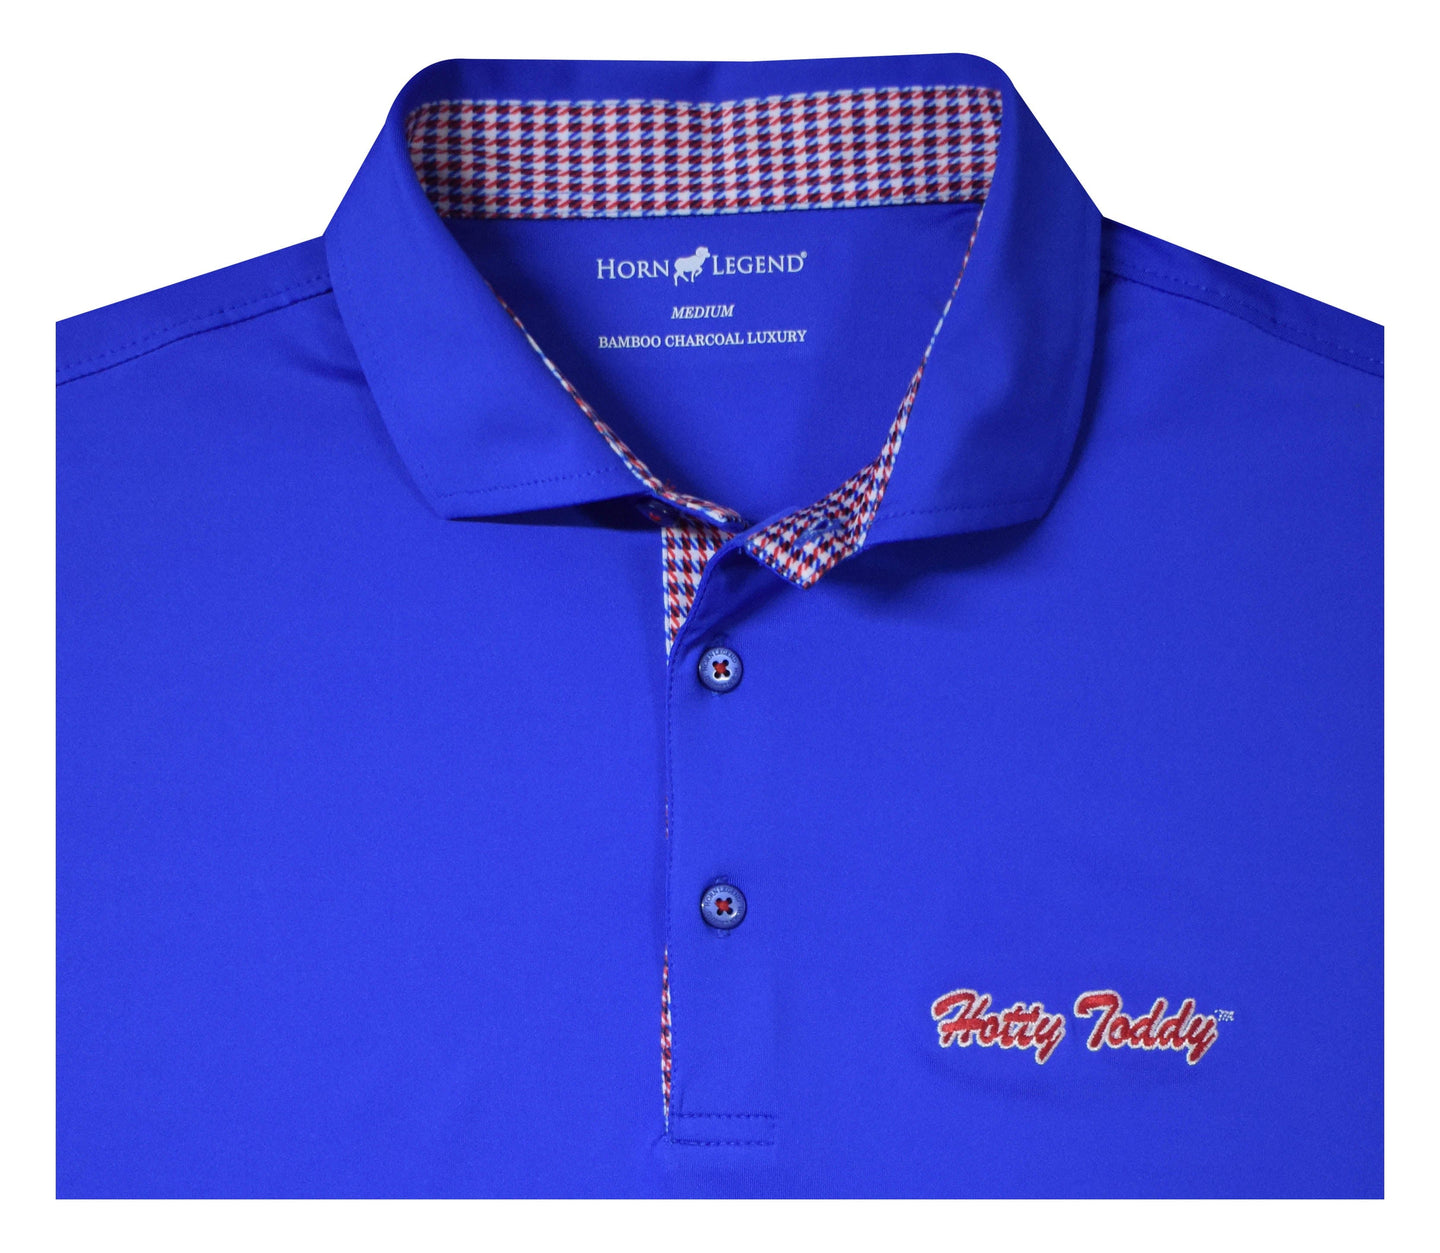 HORN LEGEND GAMEDAY - UNIVERSITY OF MISSISSIPPI - OXFORD - POLOS BLUE/RED / S HOTTY TODDY SOLID HOUNDSTOOTH TRIM POLO